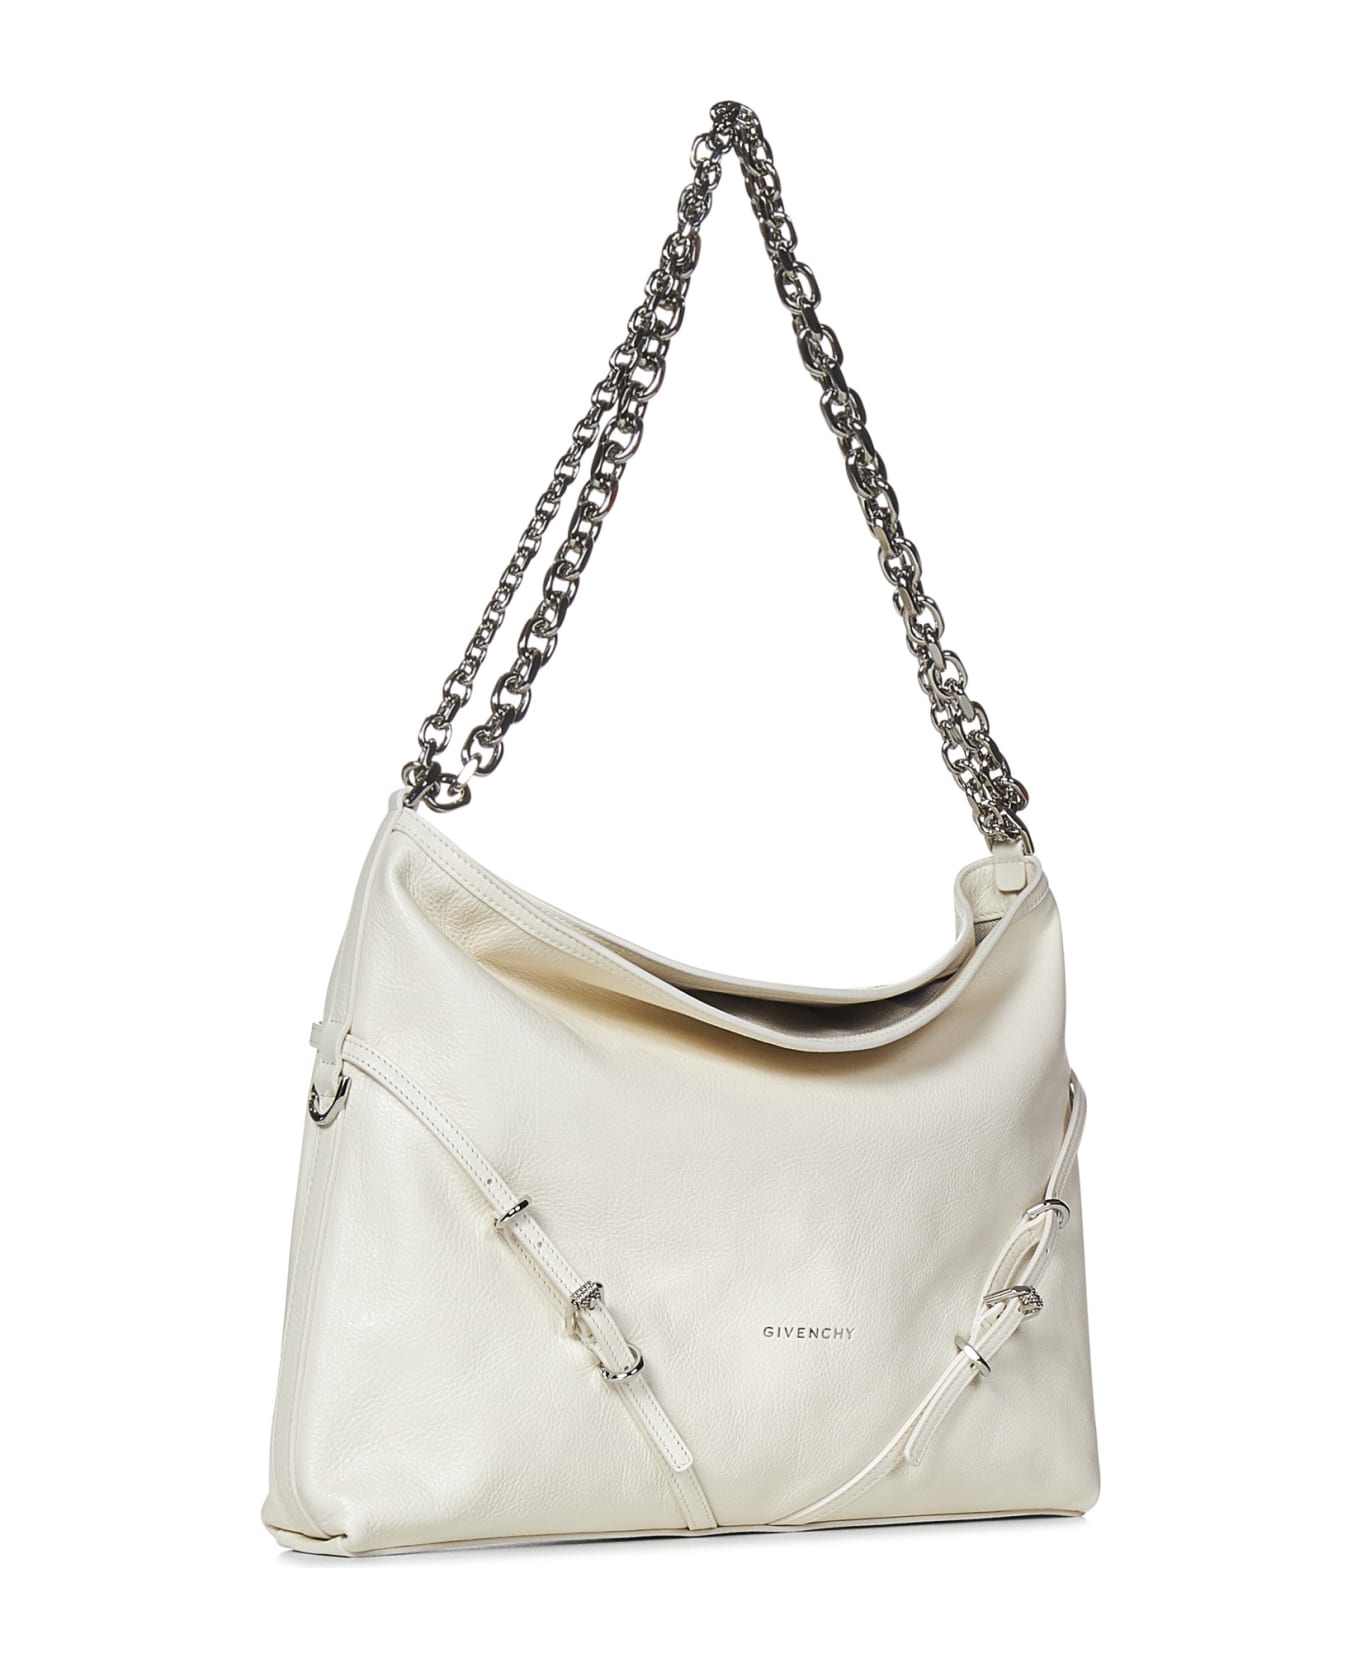 Givenchy Voyou Chain Shoulder Bag - White